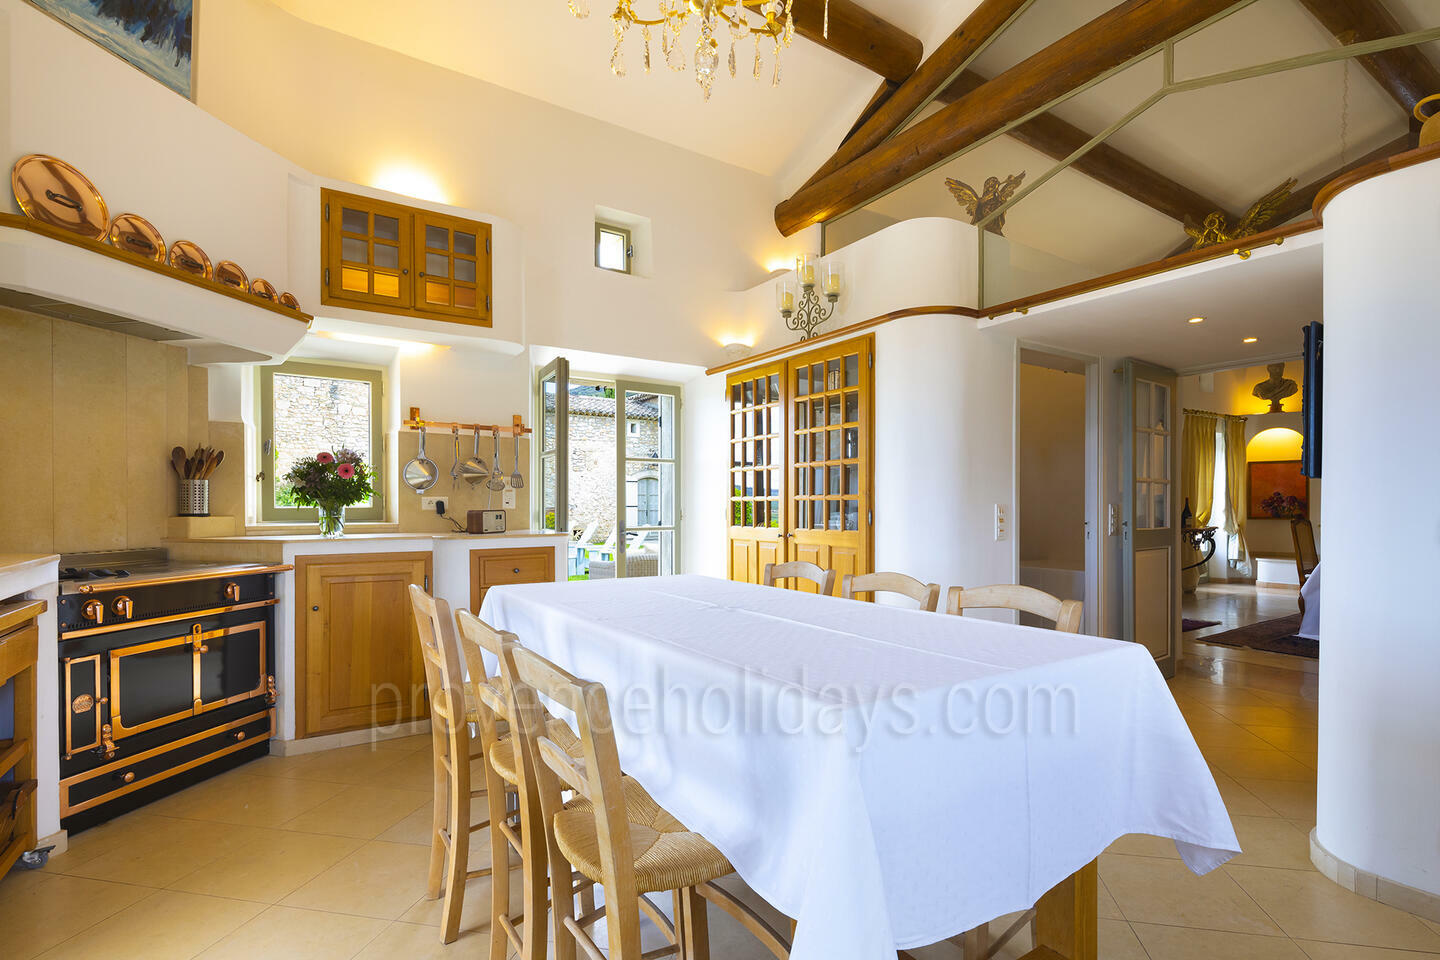 39 - Outstanding Property with Wonderful Views of the Luberon: Villa: Interior